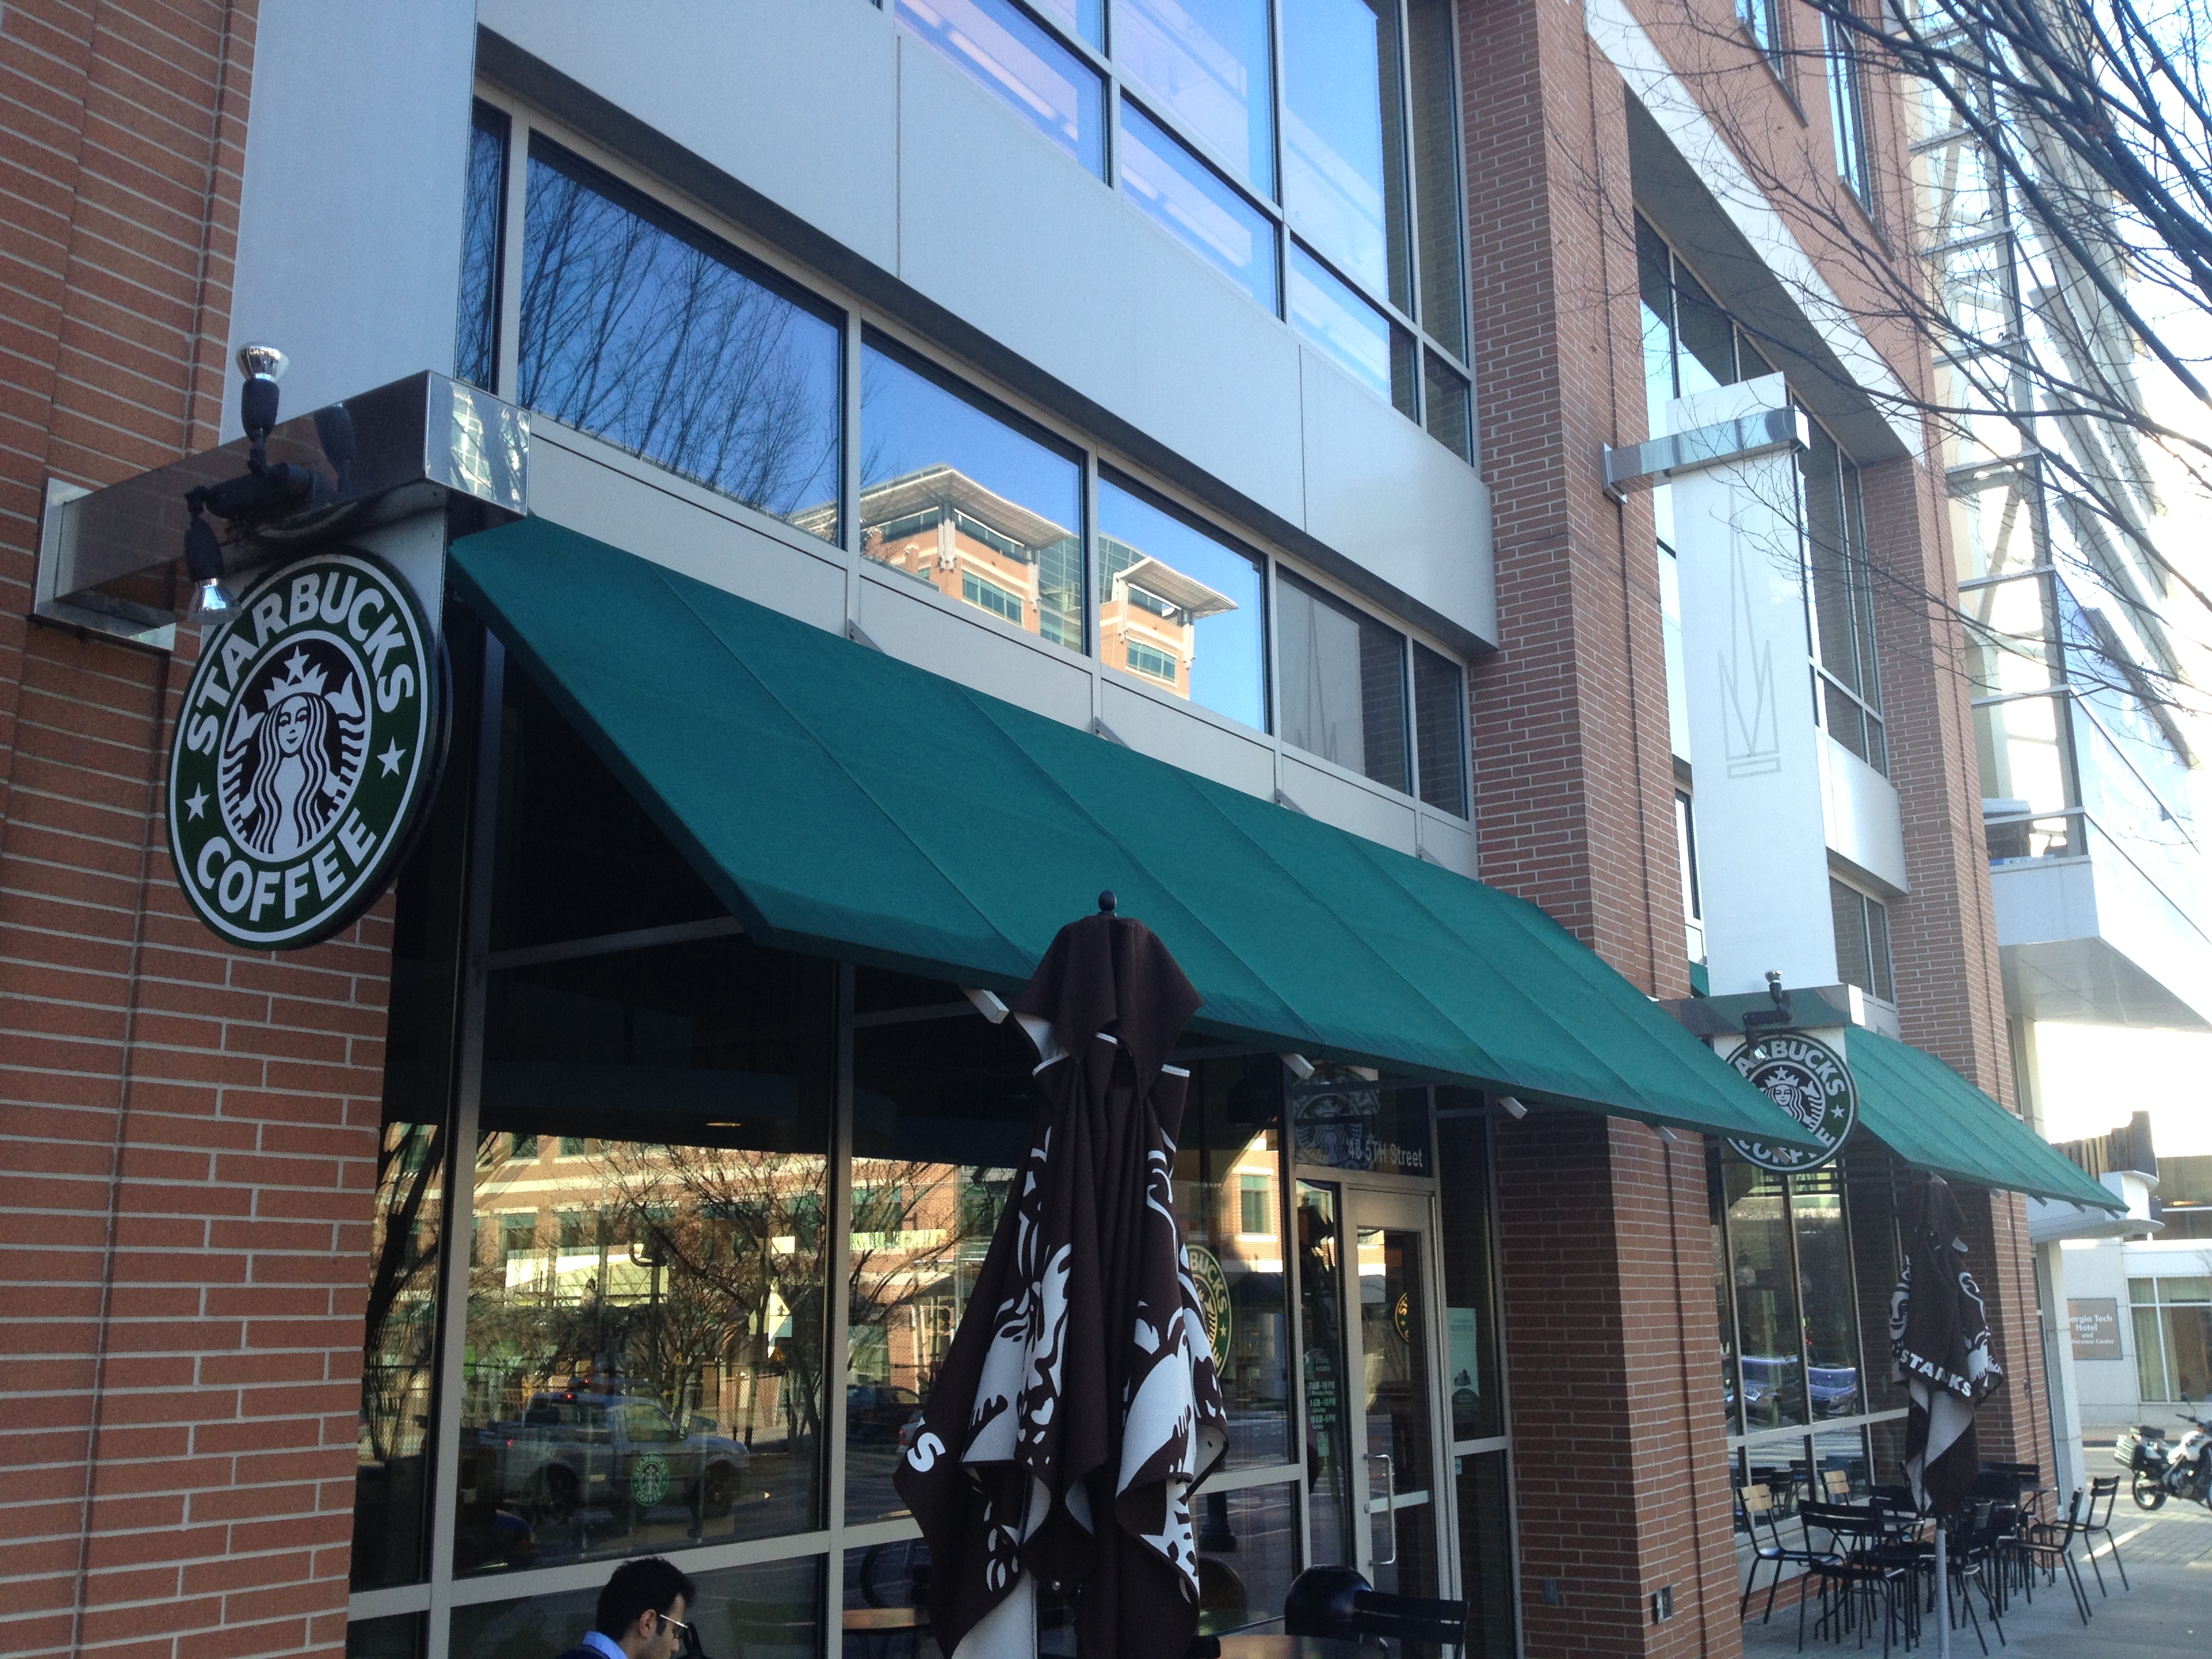 Starbucks at the Barnes & Noble on Tech Square